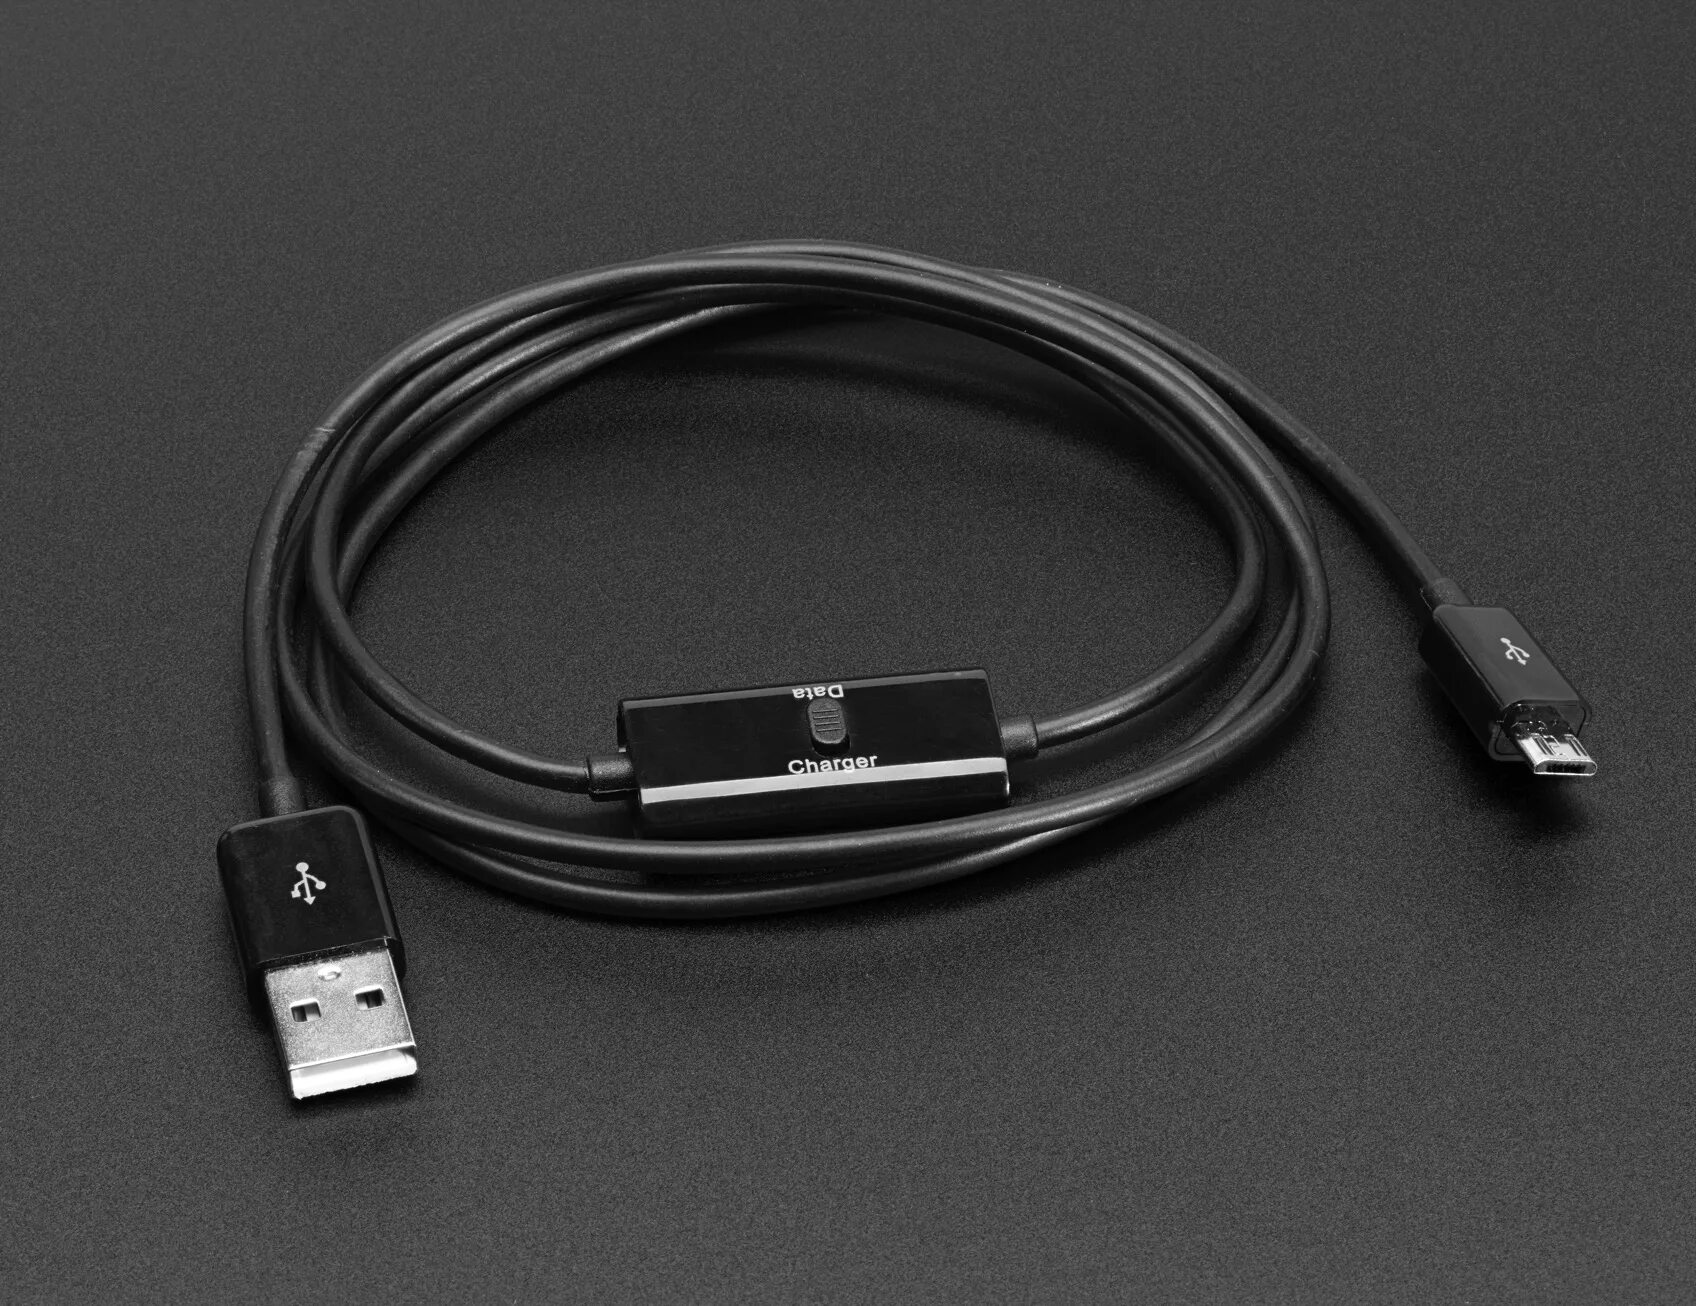 Микро информация. USB Micro ab. USB Cable Charger Extendable Retractable Cable for Kodak im5. Кабель USB A-B Chord. Tyco Electronics USB Cable.